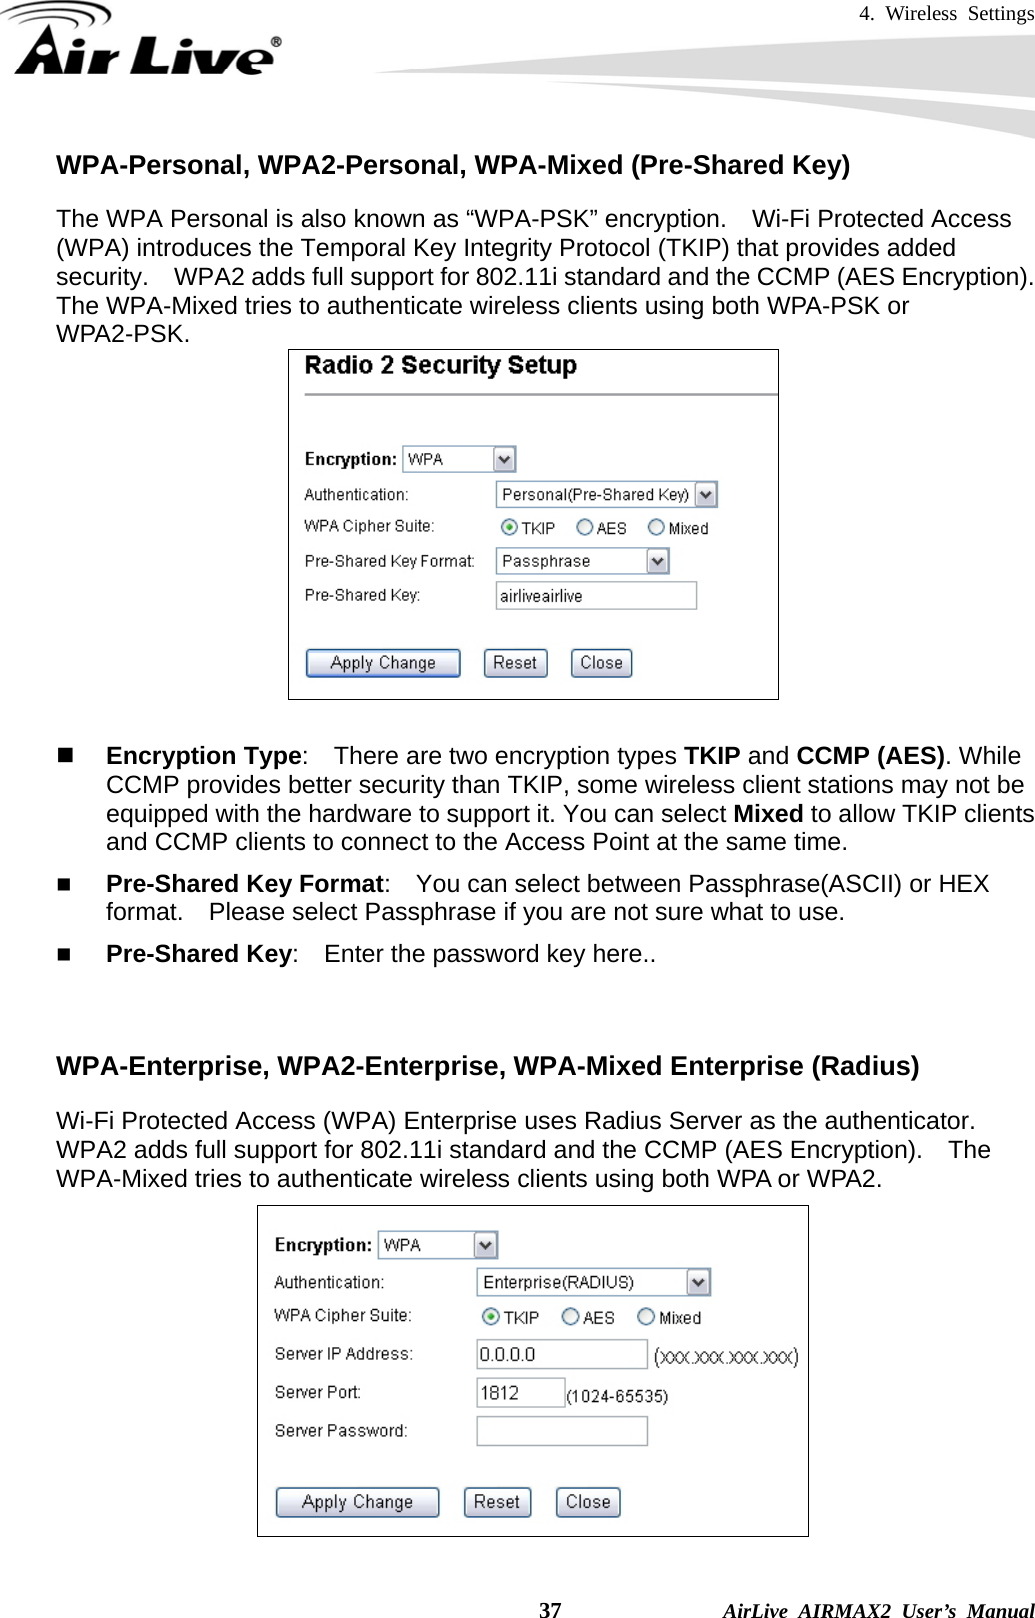 4. Wireless Settings    37              AirLive AIRMAX2 User’s Manual WPA-Personal, WPA2-Personal, WPA-Mixed (Pre-Shared Key) The WPA Personal is also known as “WPA-PSK” encryption.    Wi-Fi Protected Access (WPA) introduces the Temporal Key Integrity Protocol (TKIP) that provides added security.    WPA2 adds full support for 802.11i standard and the CCMP (AES Encryption).   The WPA-Mixed tries to authenticate wireless clients using both WPA-PSK or WPA2-PSK.      Encryption Type:    There are two encryption types TKIP and CCMP (AES). While CCMP provides better security than TKIP, some wireless client stations may not be equipped with the hardware to support it. You can select Mixed to allow TKIP clients and CCMP clients to connect to the Access Point at the same time.    Pre-Shared Key Format:    You can select between Passphrase(ASCII) or HEX format.    Please select Passphrase if you are not sure what to use.  Pre-Shared Key:    Enter the password key here..   WPA-Enterprise, WPA2-Enterprise, WPA-Mixed Enterprise (Radius) Wi-Fi Protected Access (WPA) Enterprise uses Radius Server as the authenticator.   WPA2 adds full support for 802.11i standard and the CCMP (AES Encryption).    The WPA-Mixed tries to authenticate wireless clients using both WPA or WPA2.      